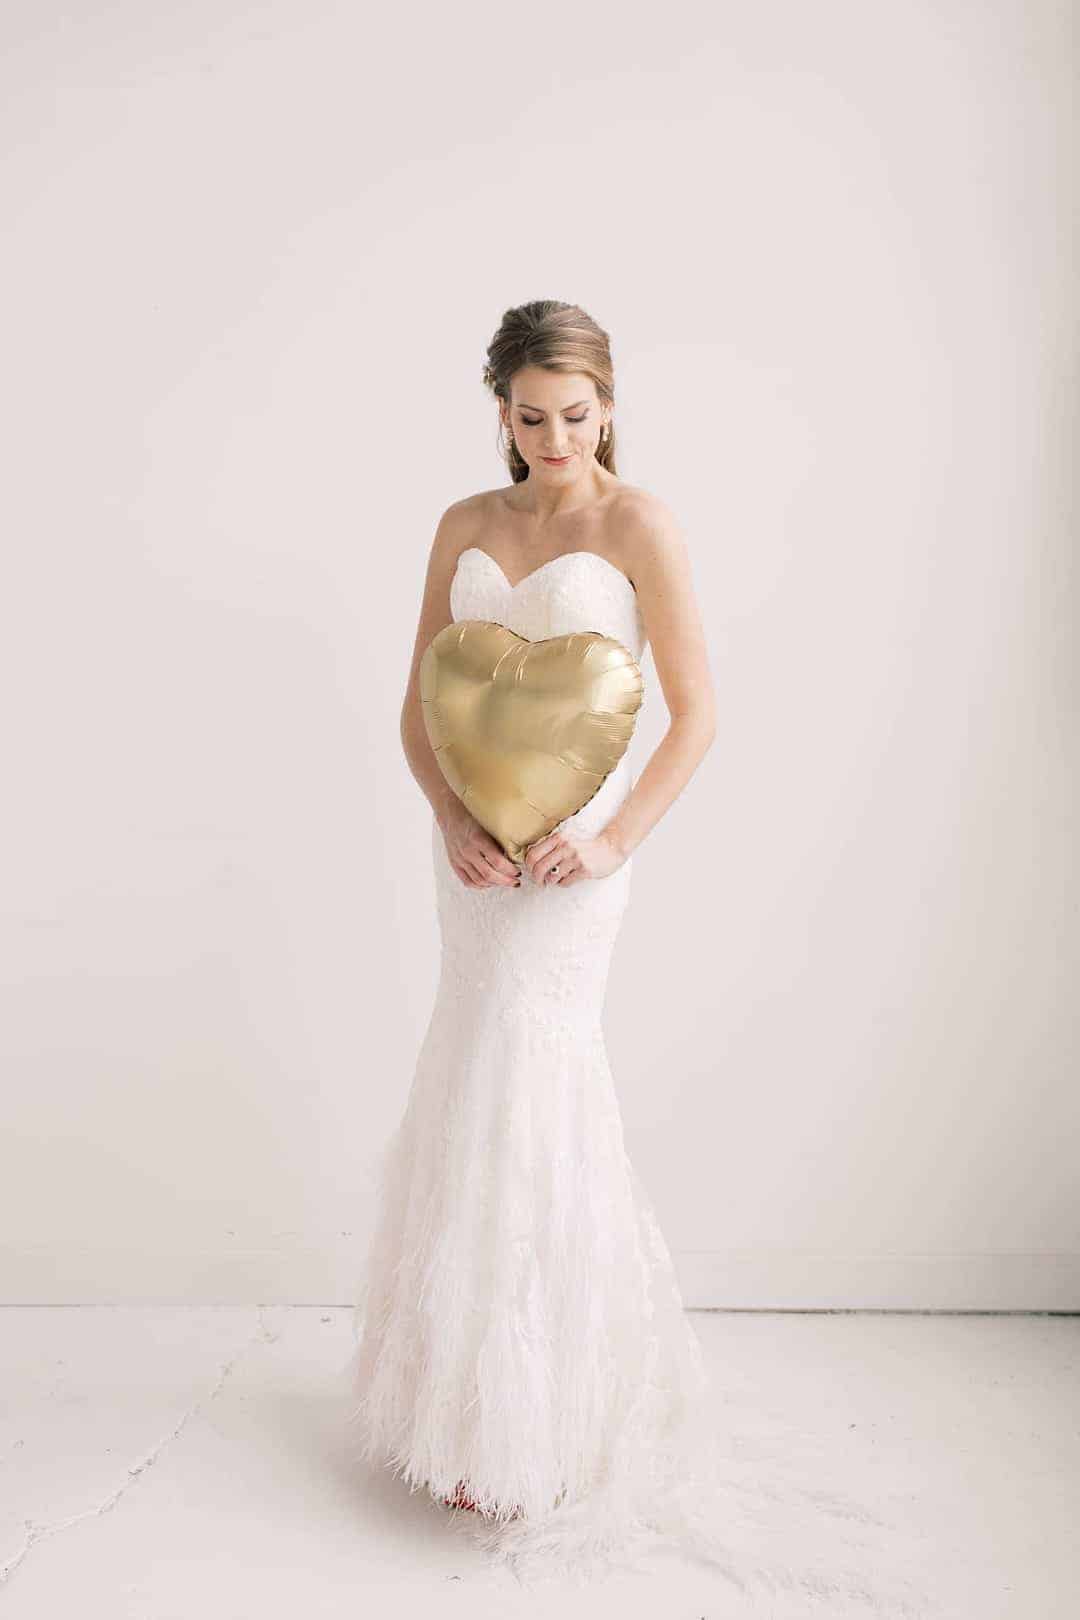 Valentines Day wedding inspiration, featuring giant heart balloon backdrop and romantic feather wedding dress